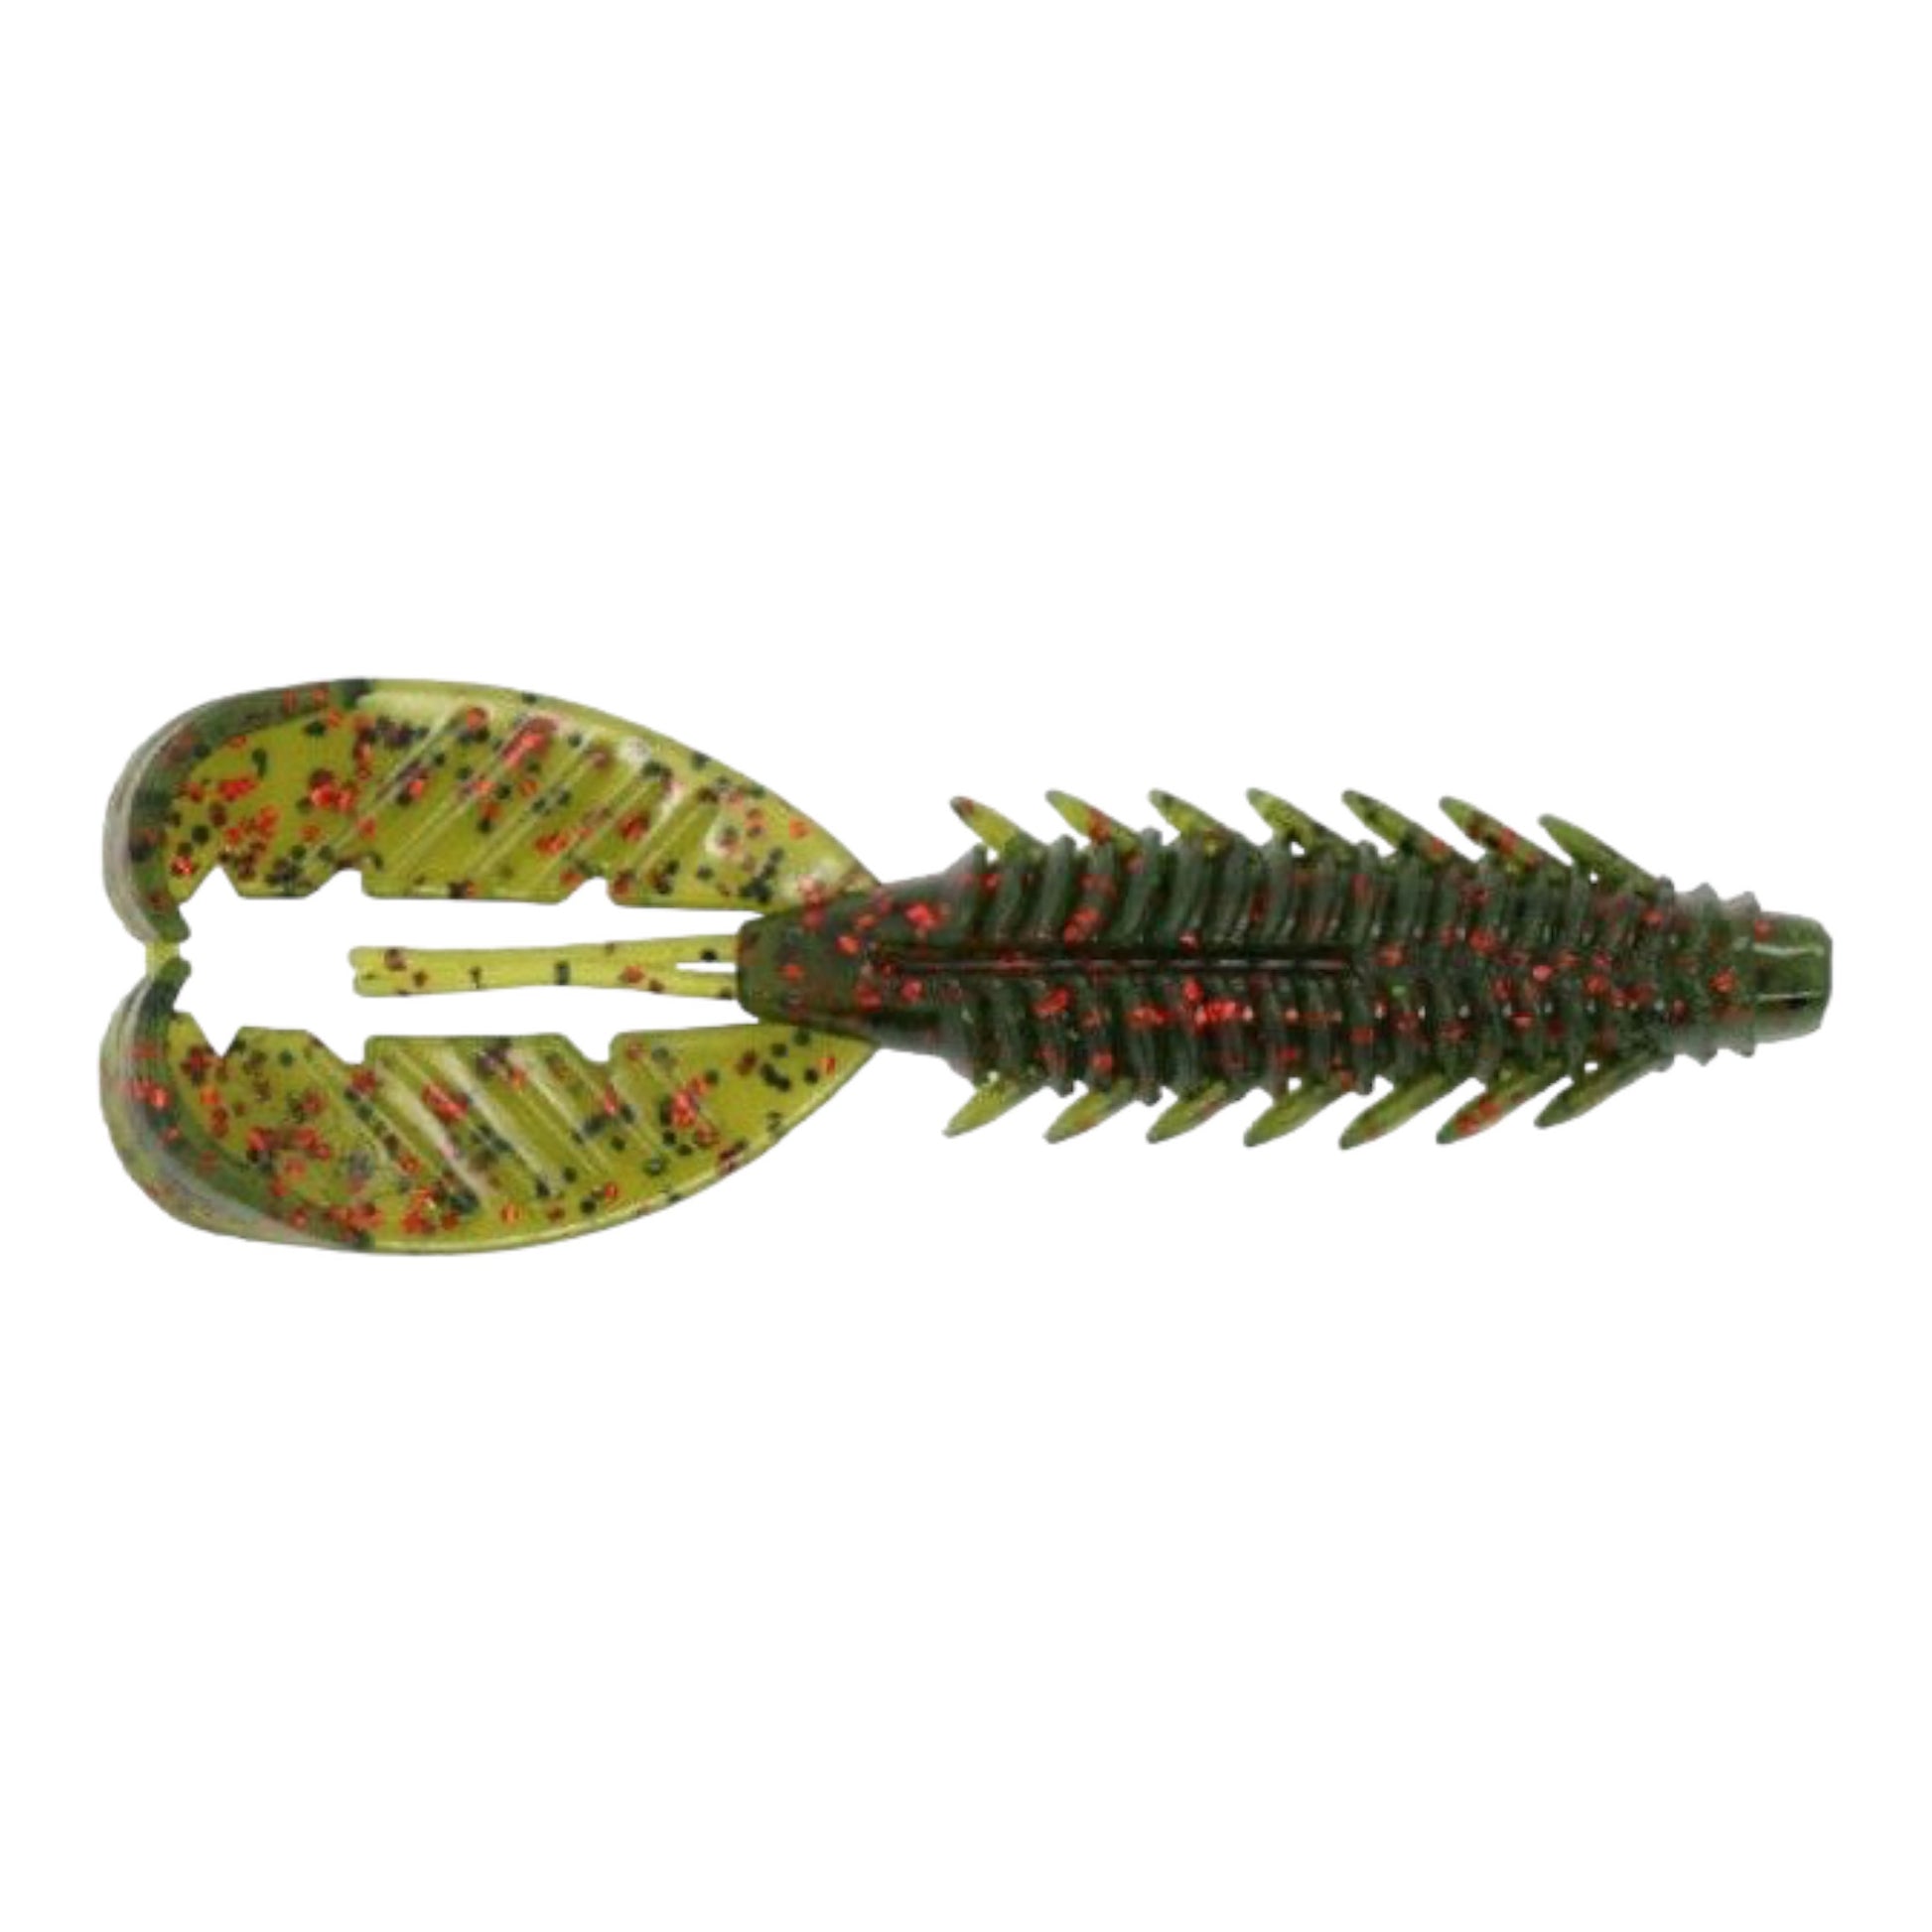 Xzone Lures Adrenaline Craw with Floating Claws 4.25 – Three